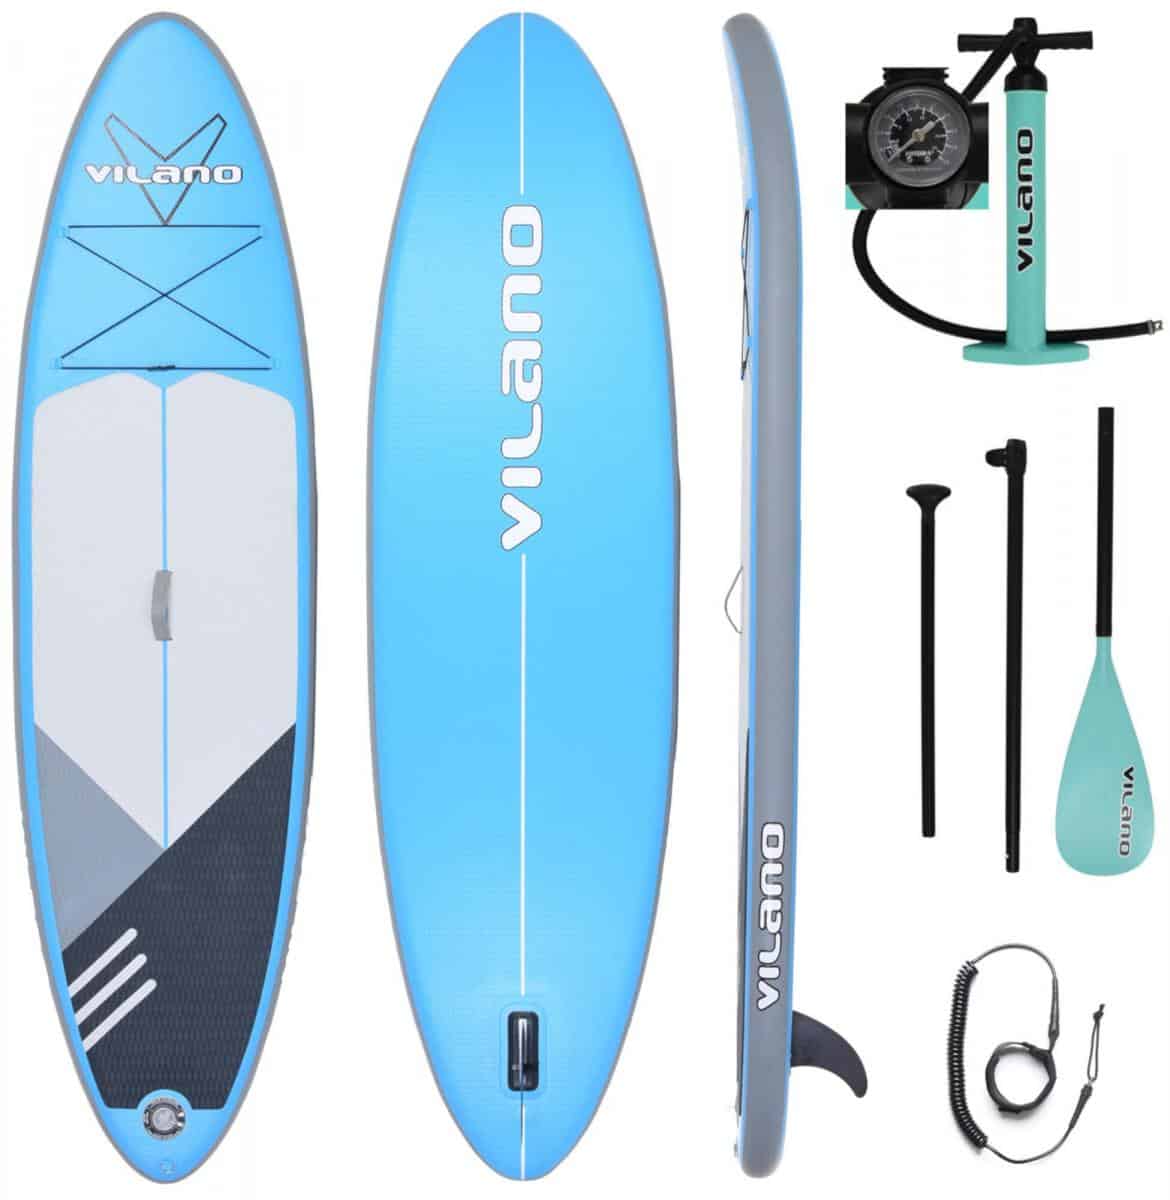 Pathfinder Inflatable SUP Board Bundle Review [Feb 2023]